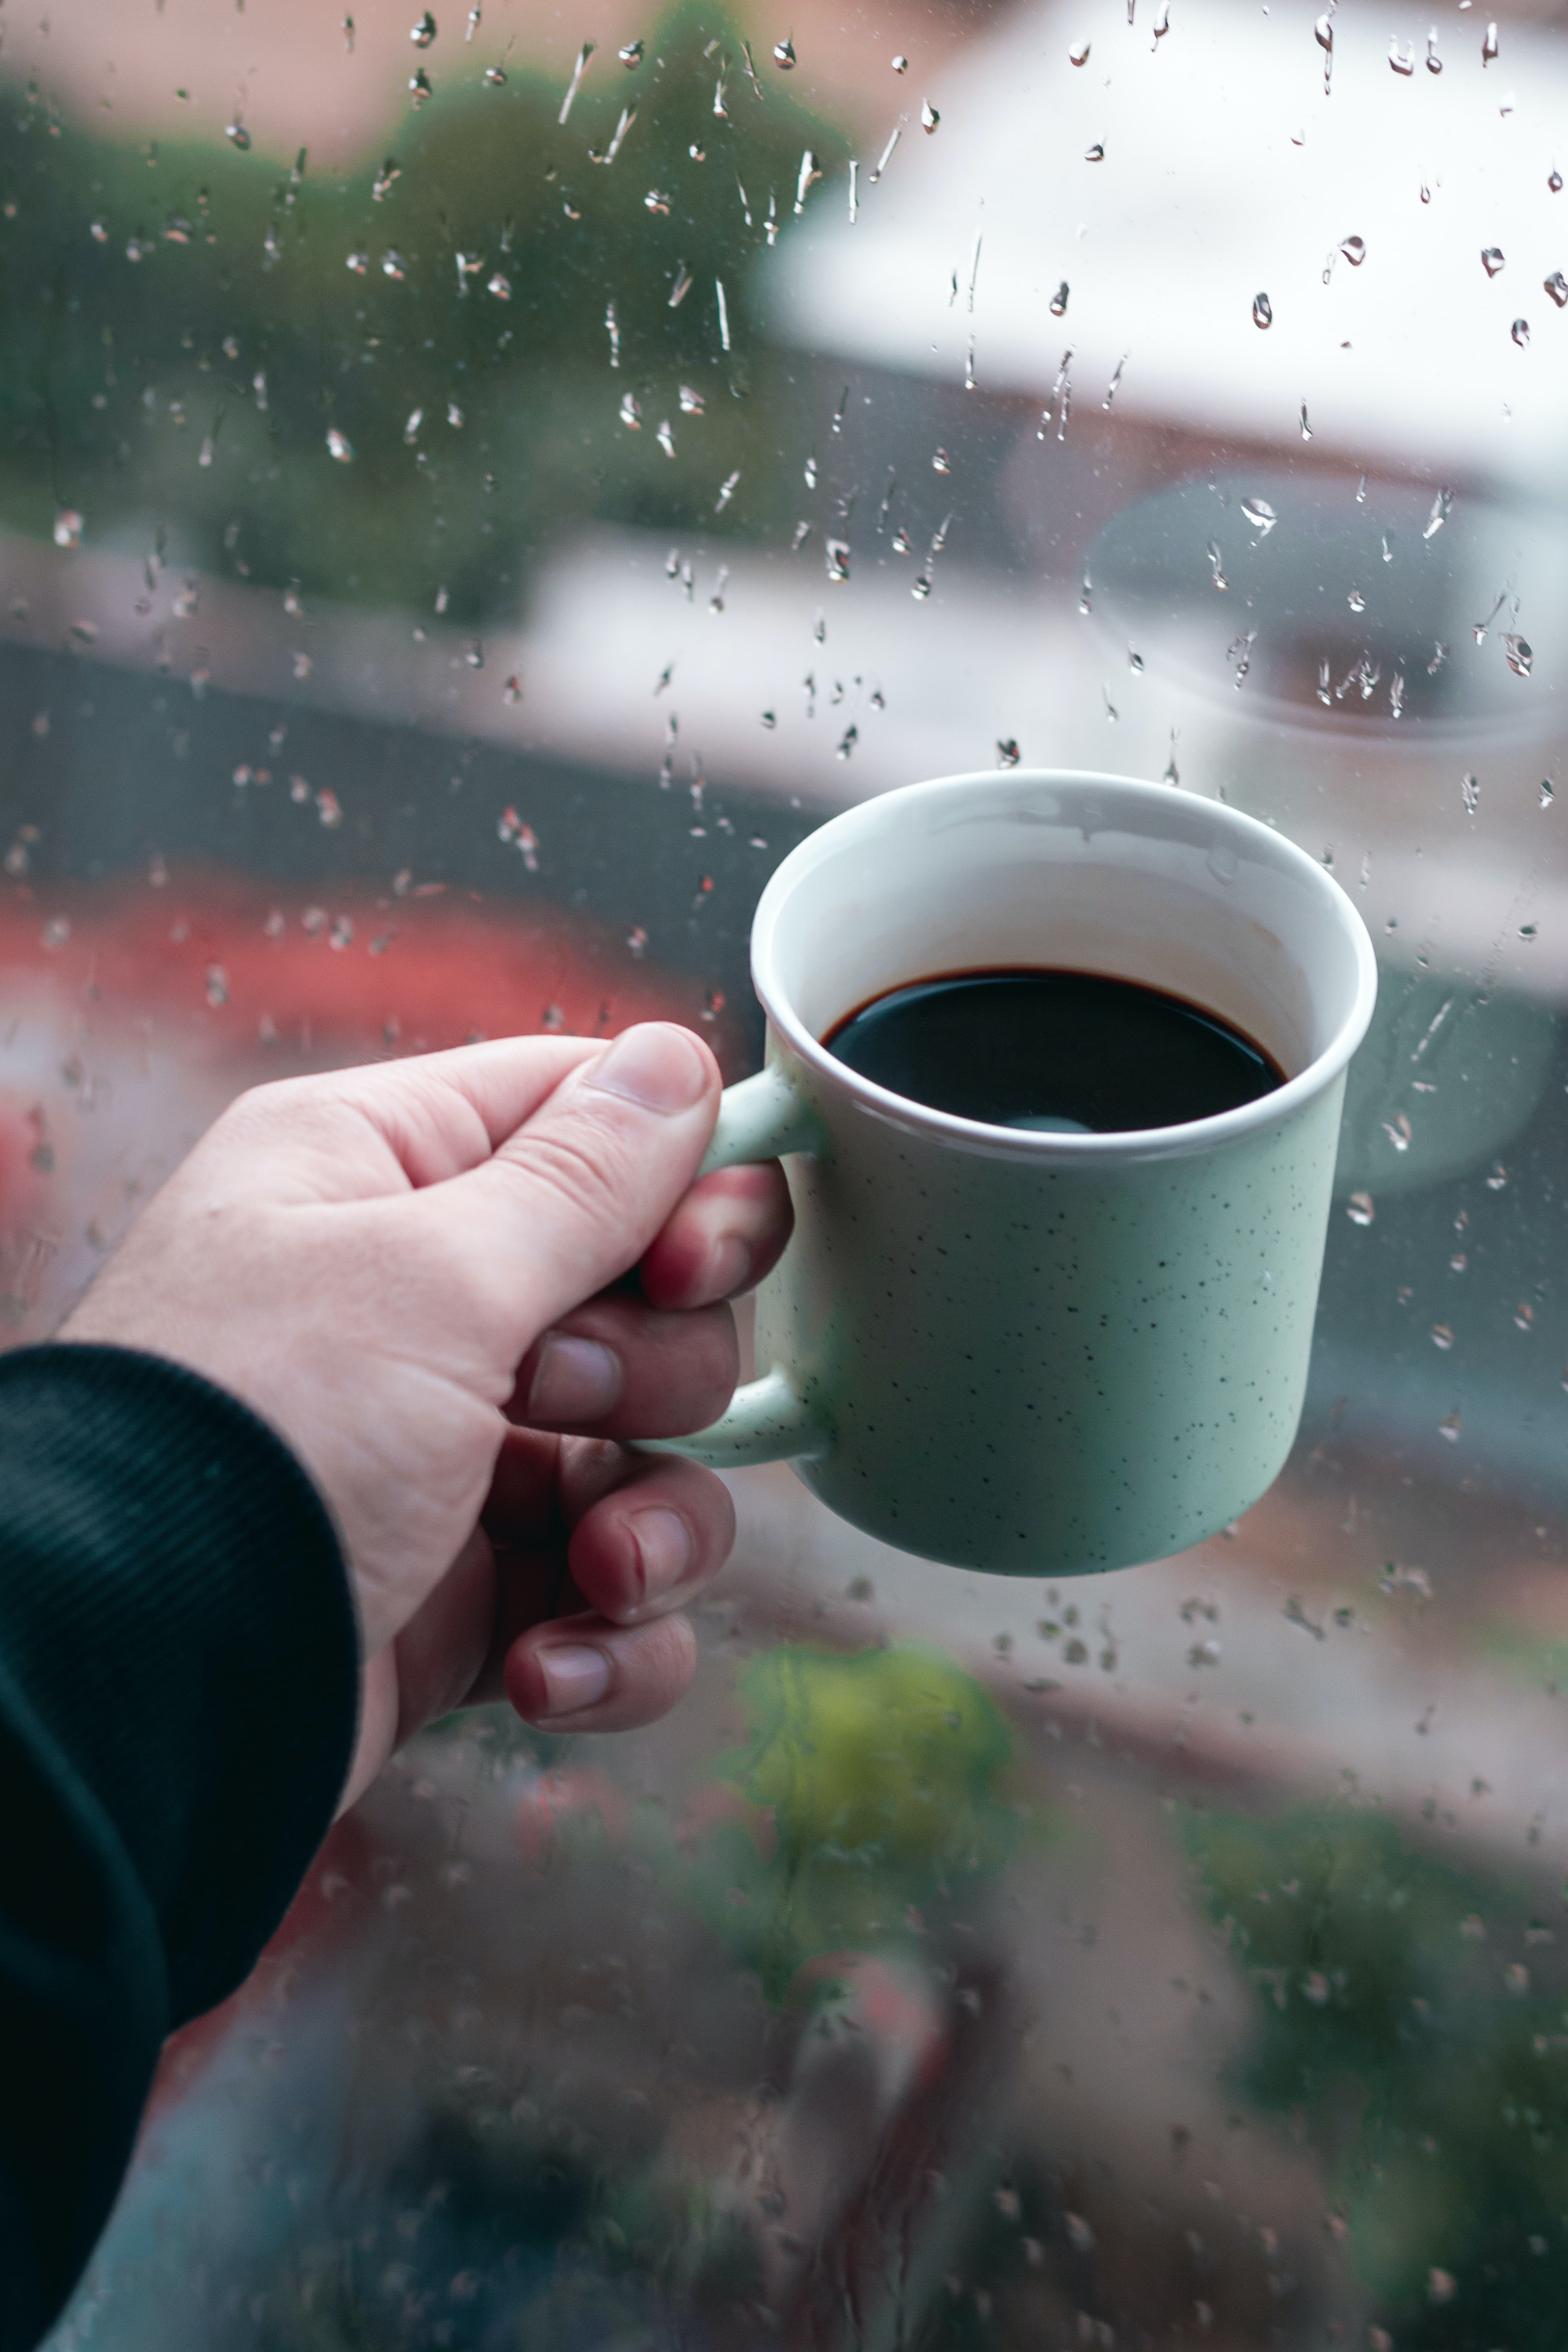 100167 download wallpaper coffee, rain, hand, miscellanea, miscellaneous, cup, window, mug screensavers and pictures for free